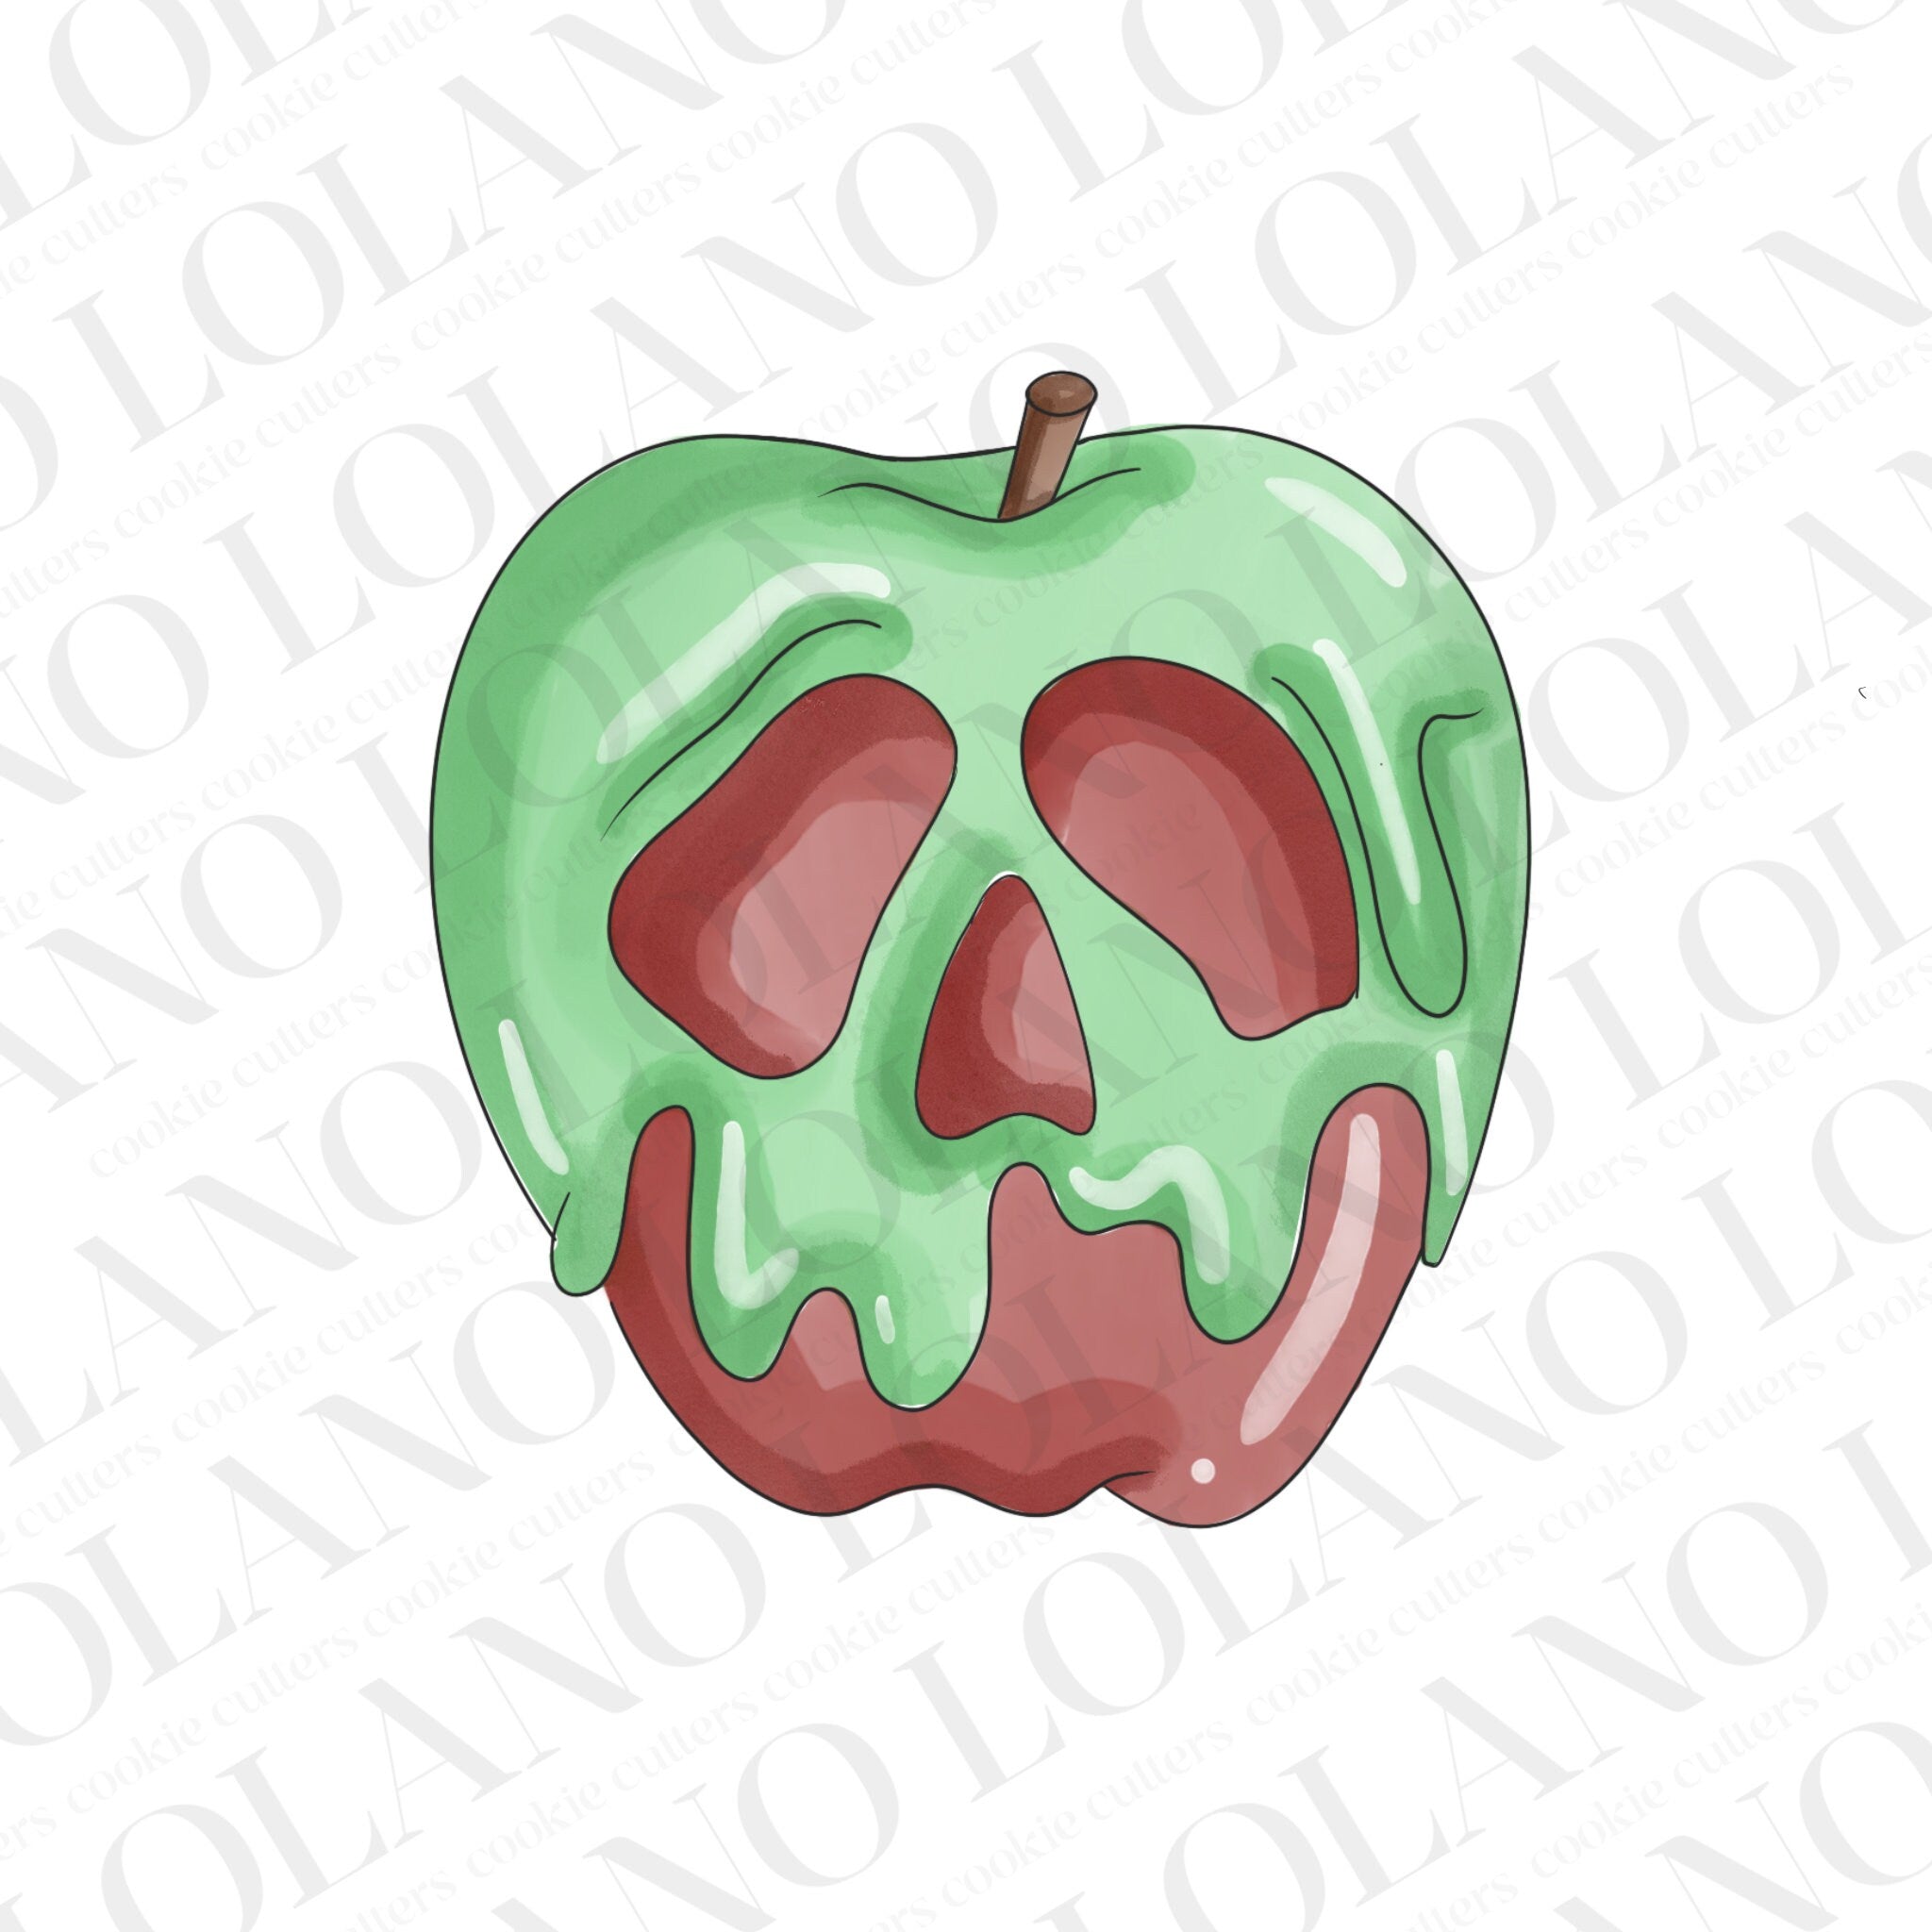 Melted apple skull cookie cutter